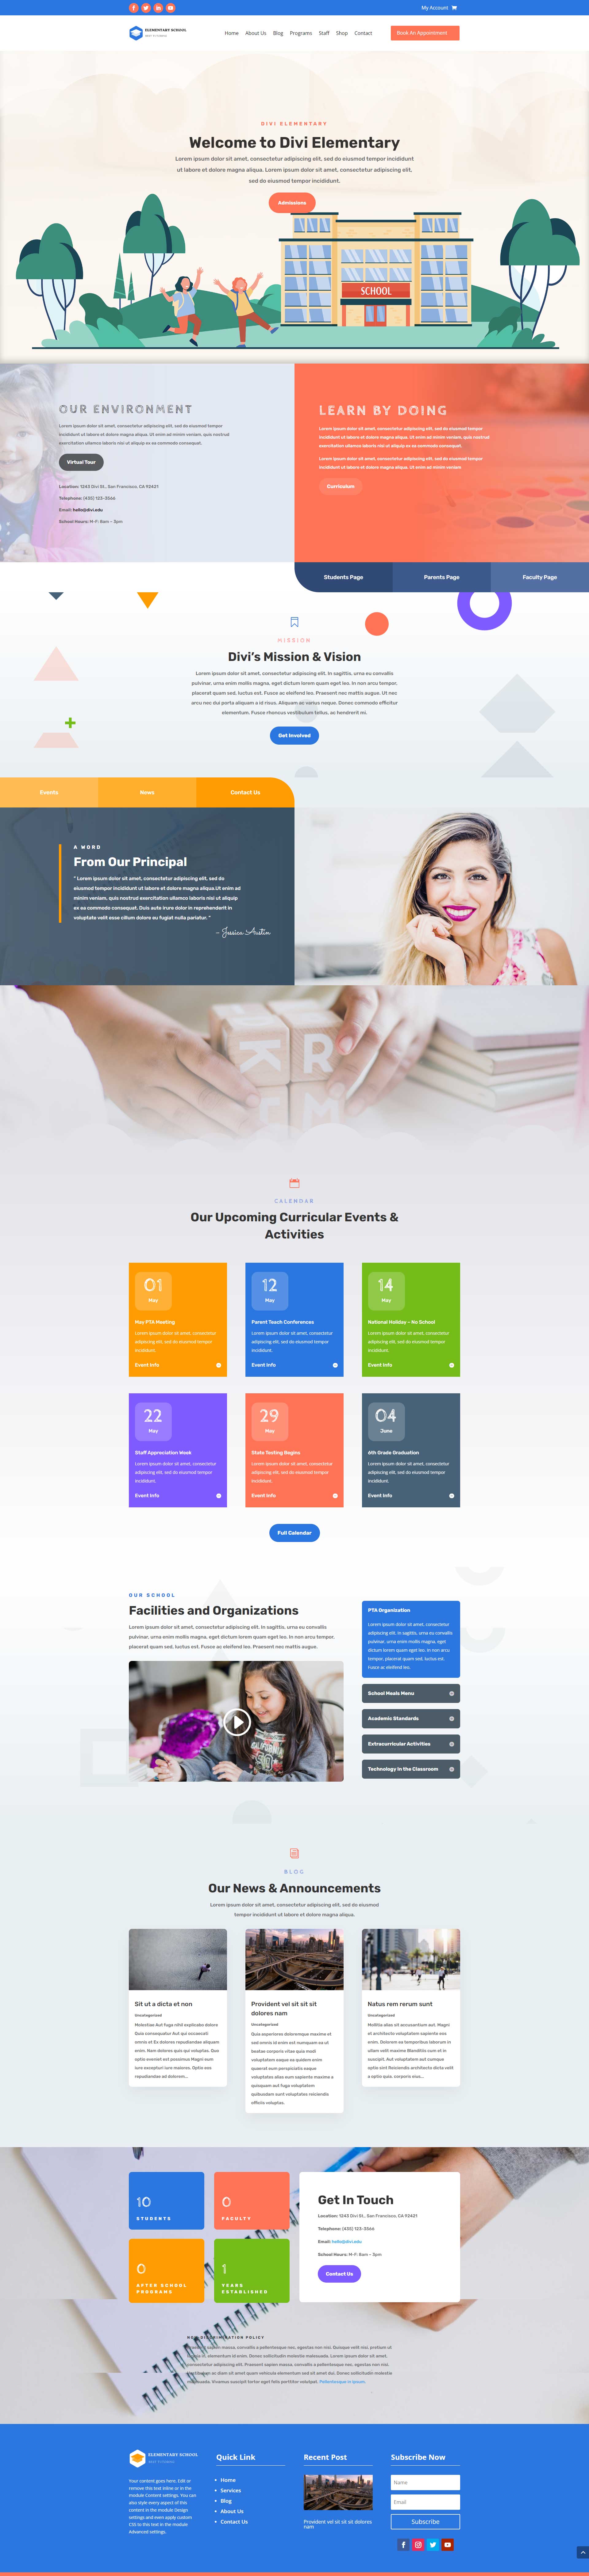 Home page design